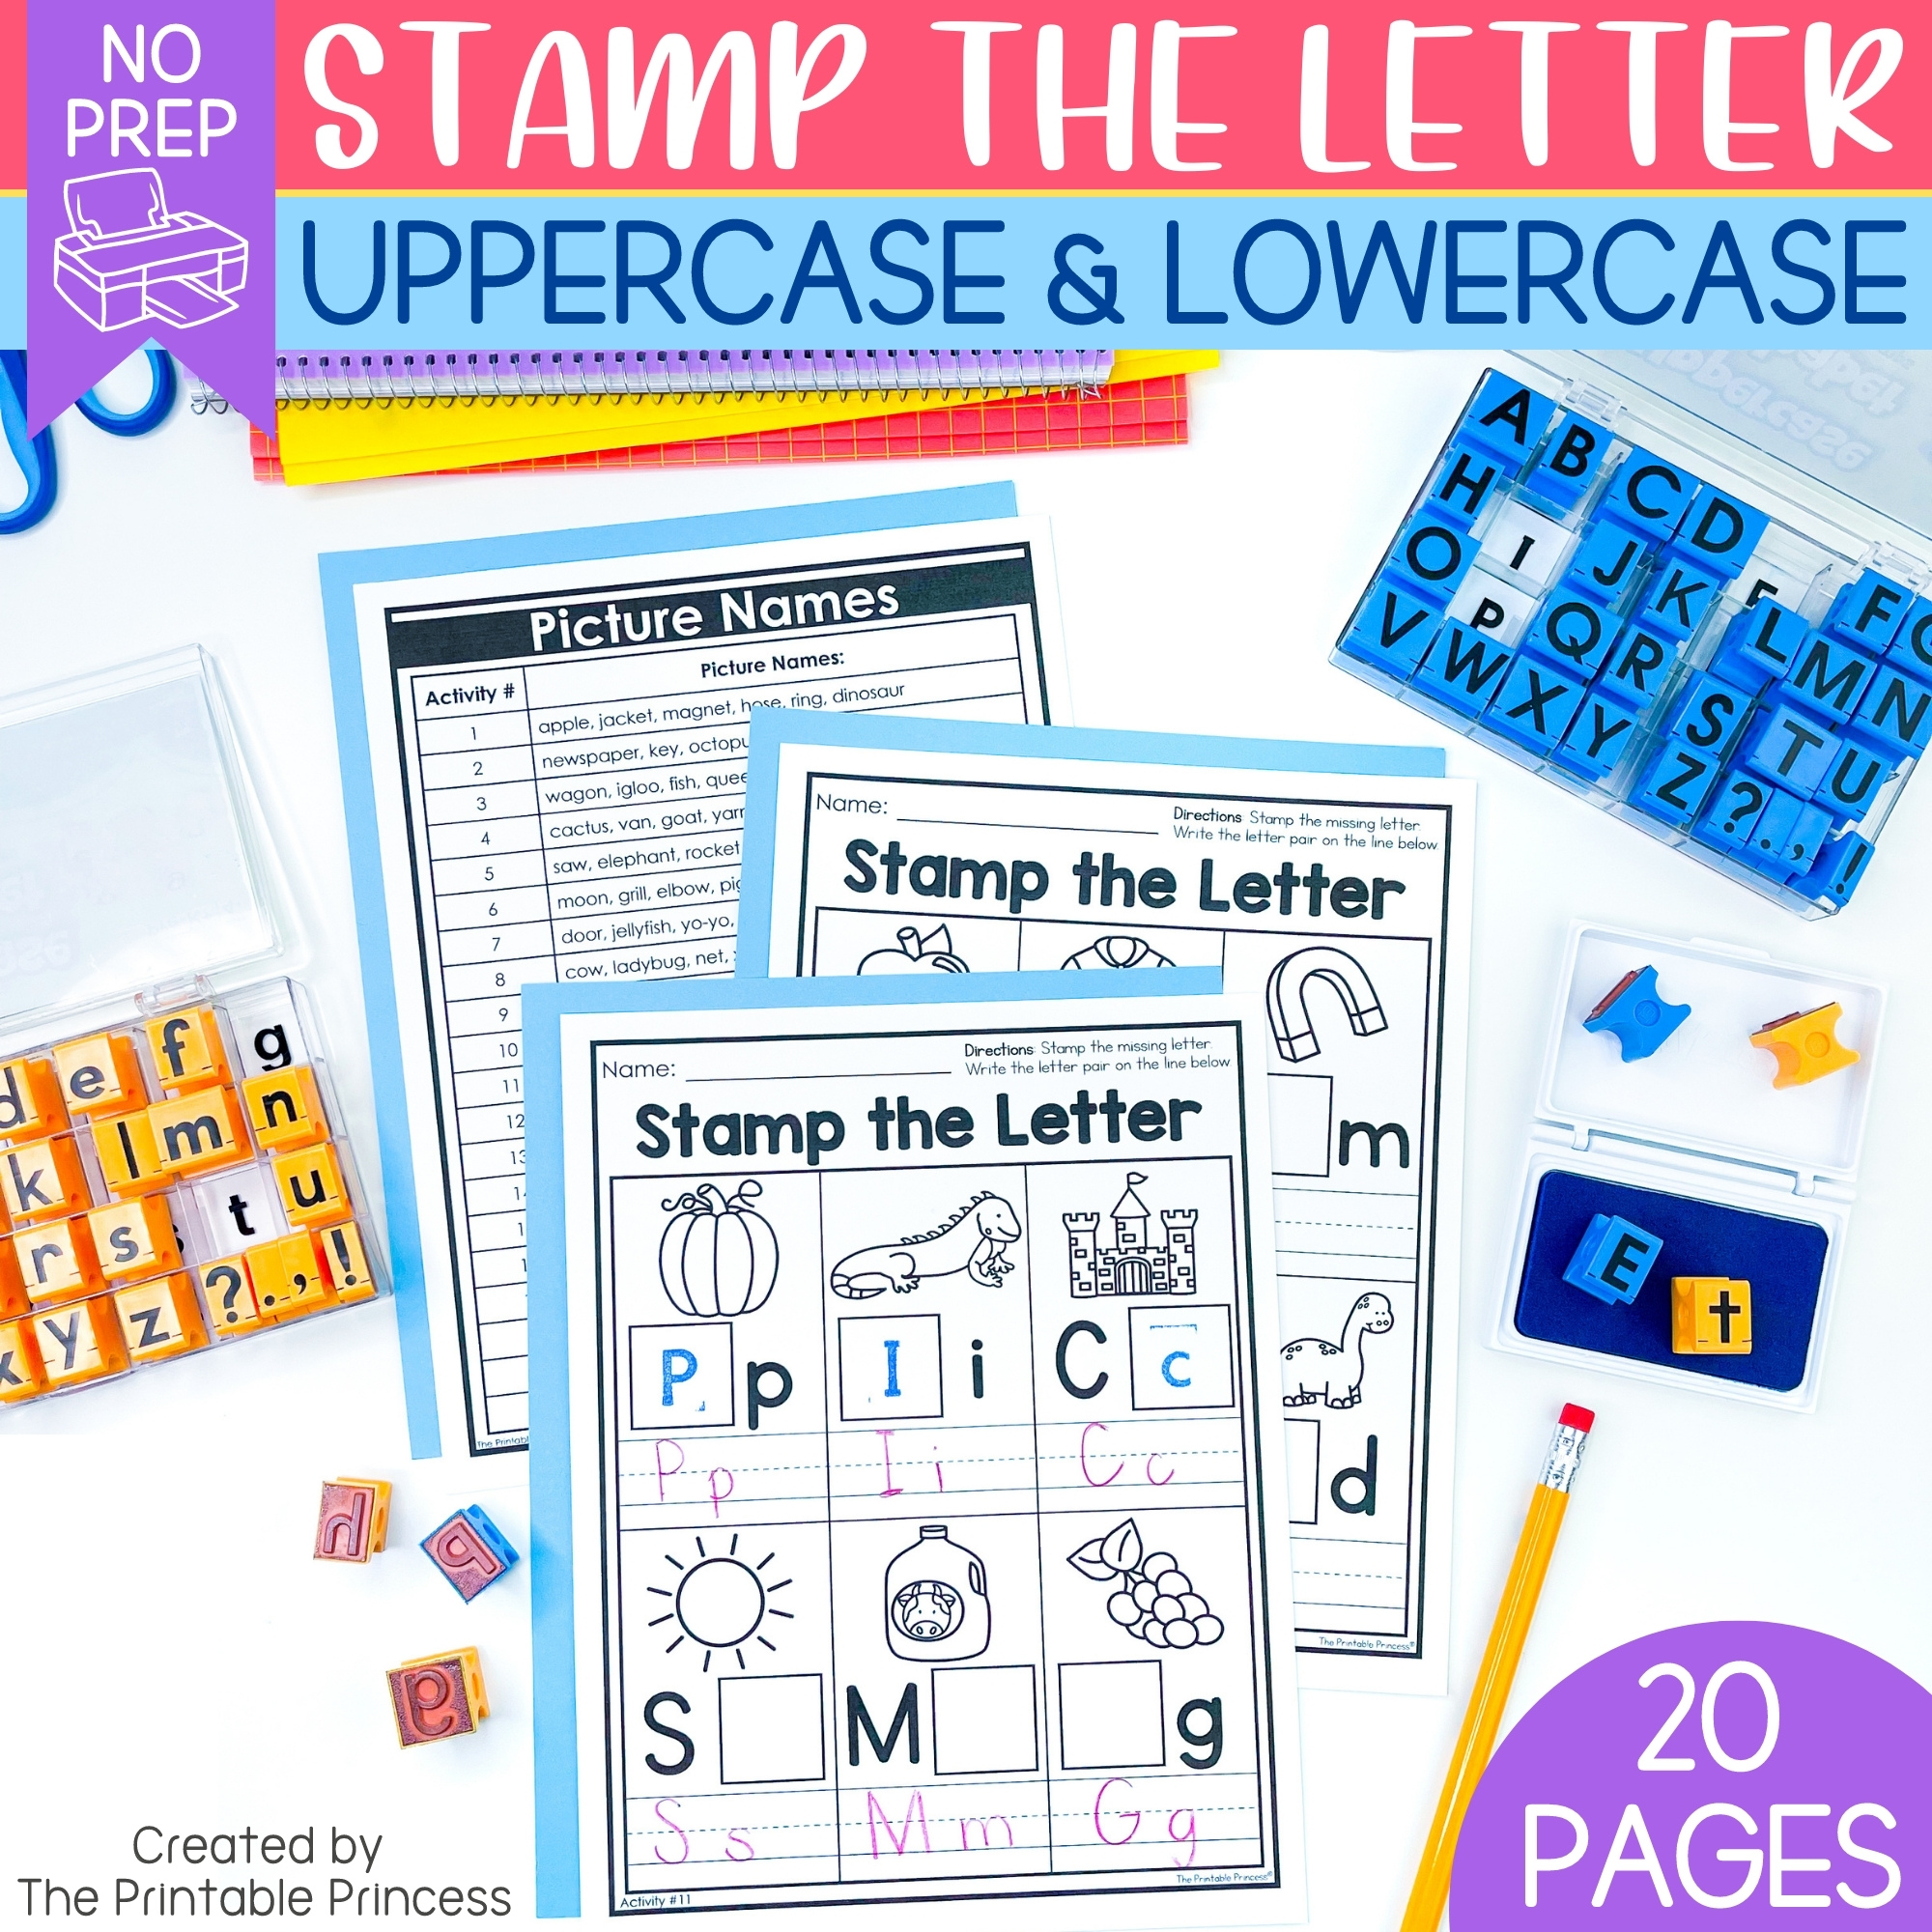 Matching Uppercase and Lowercase Letters - The Printable Princess